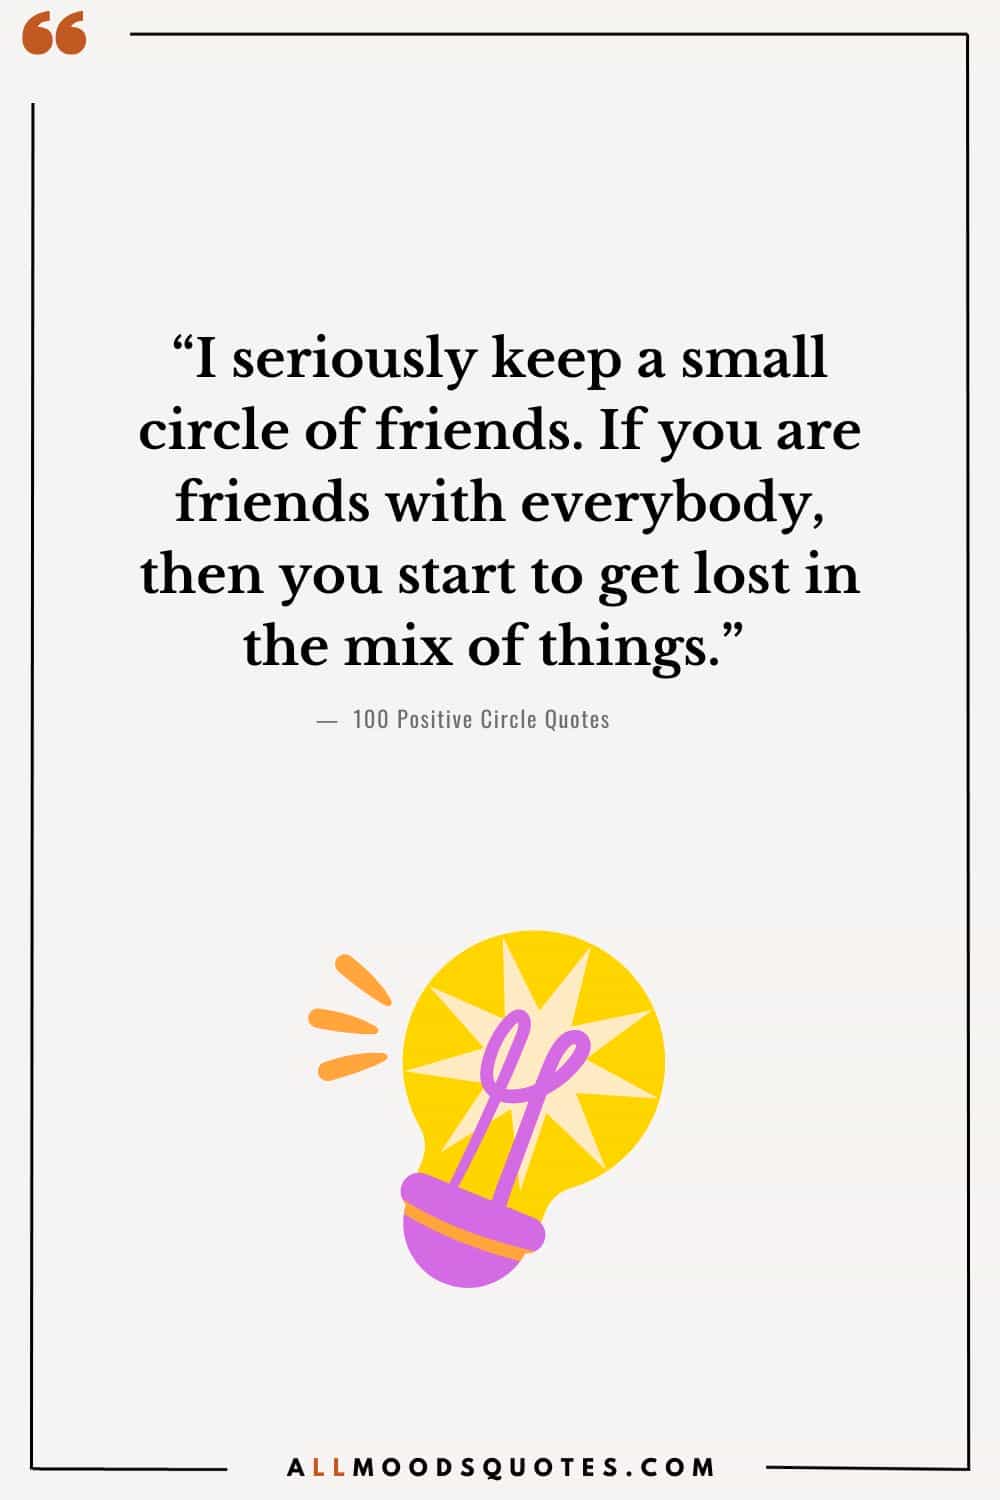 “I seriously keep a small circle of friends. If you are friends with everybody, then you start to get lost in the mix of things.” — Unknown